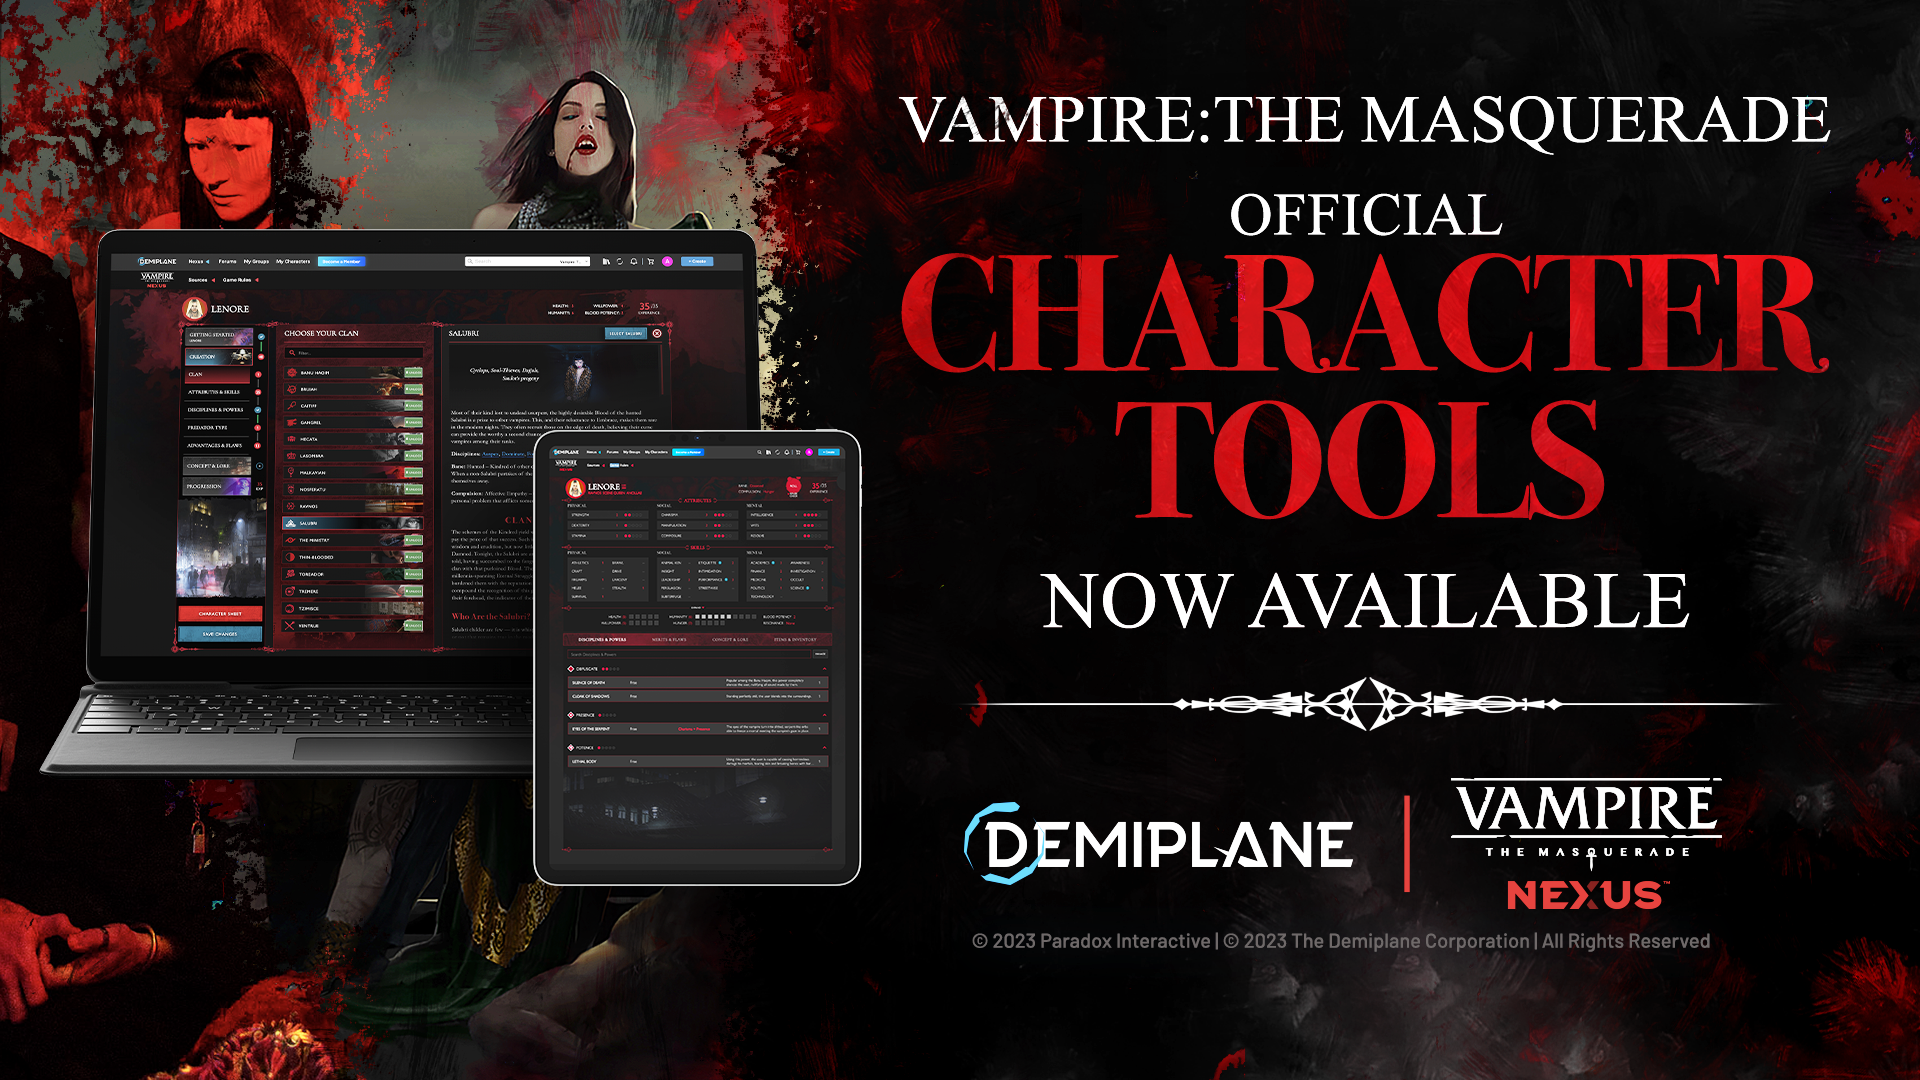 World of Darkness - Demiplane Character Tools Promo